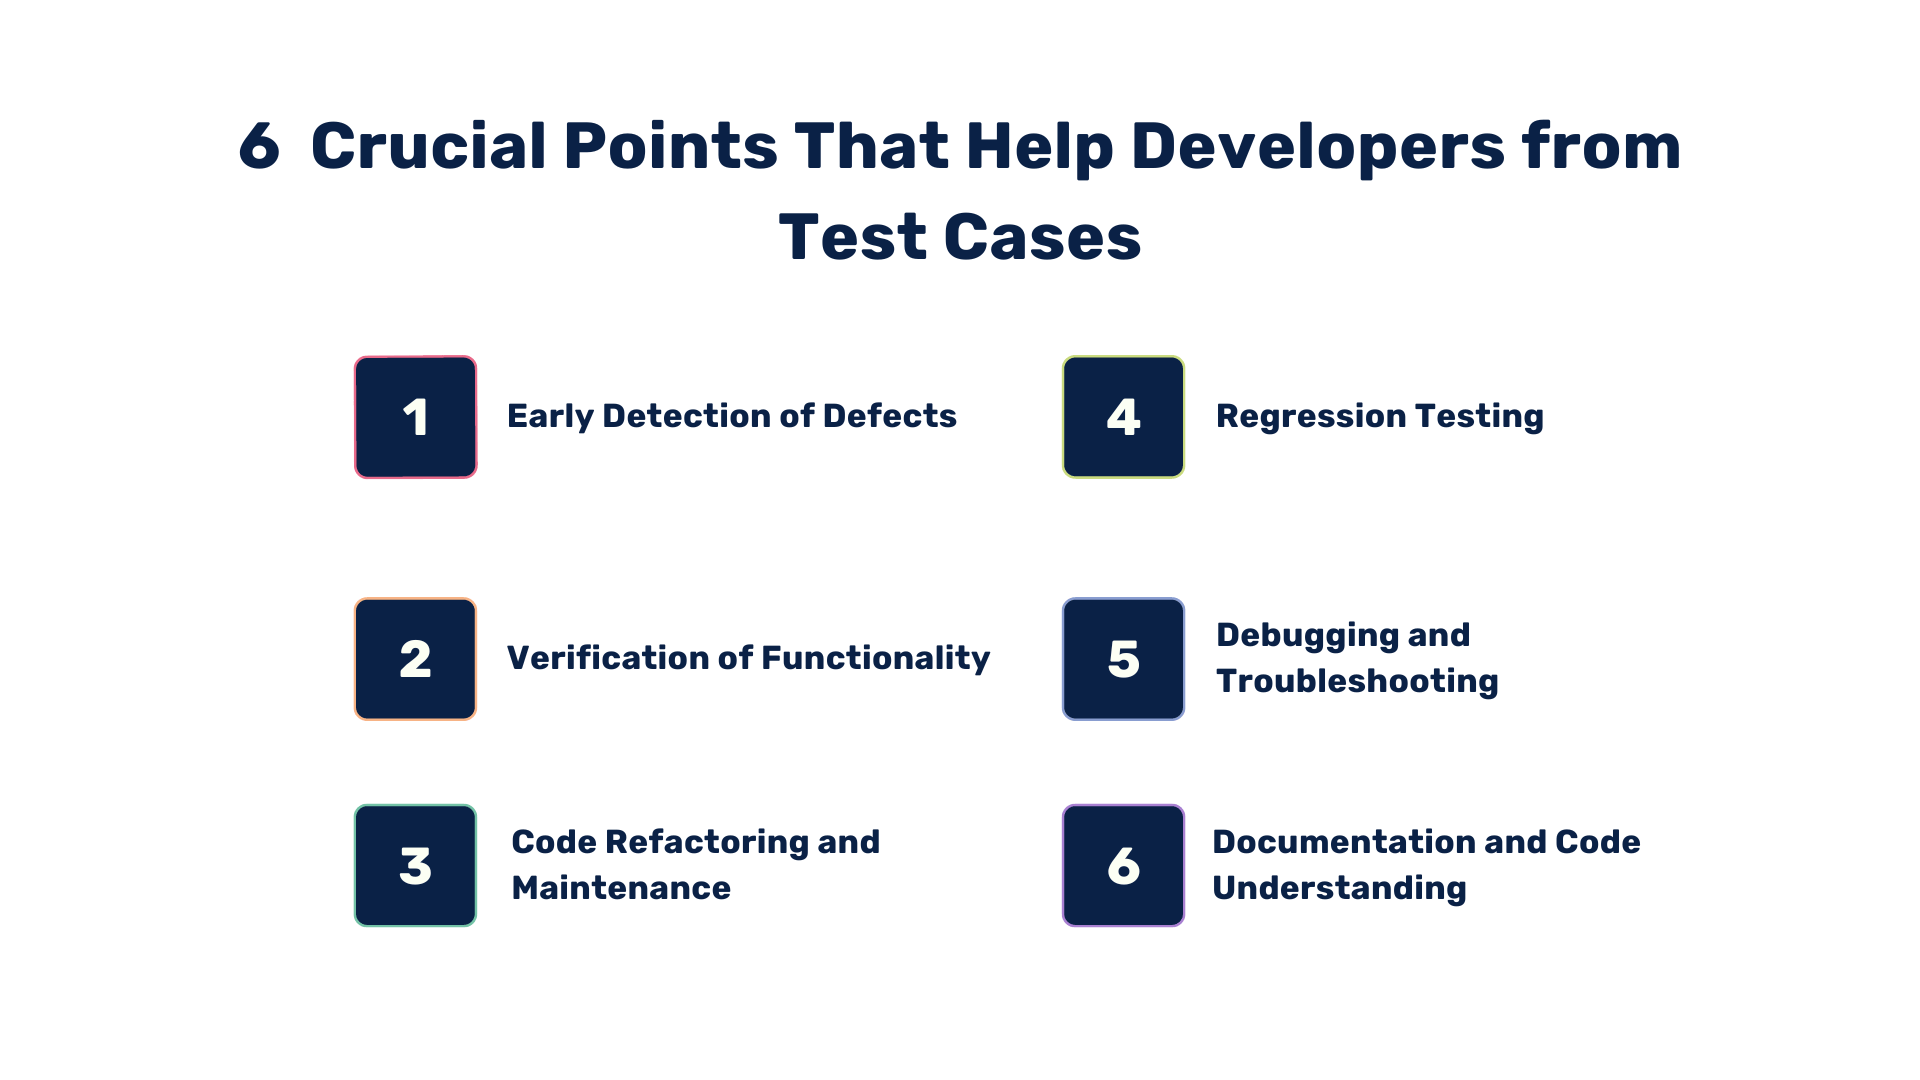 6 crucial points that help developers from test cases